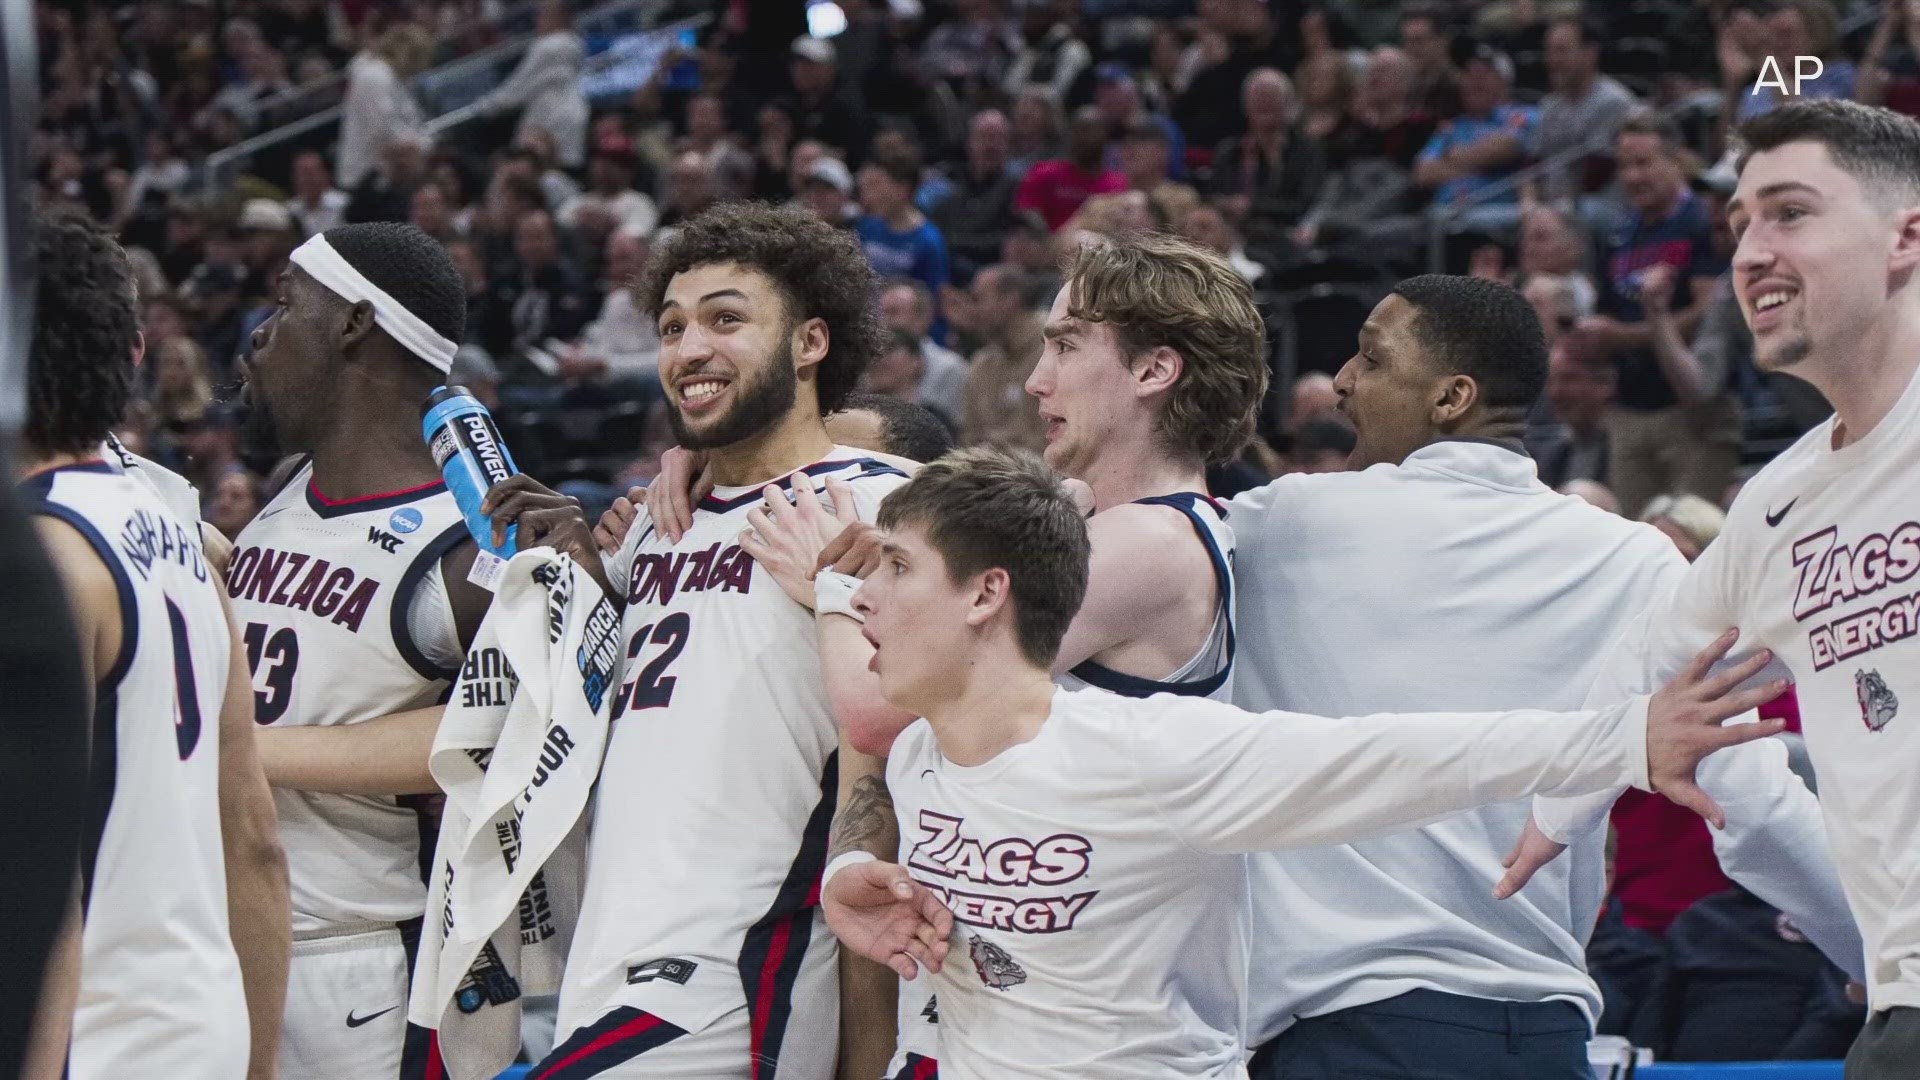 Gonzaga will face either No. 4 Kansas or 13th-seeded Samford in the next round.